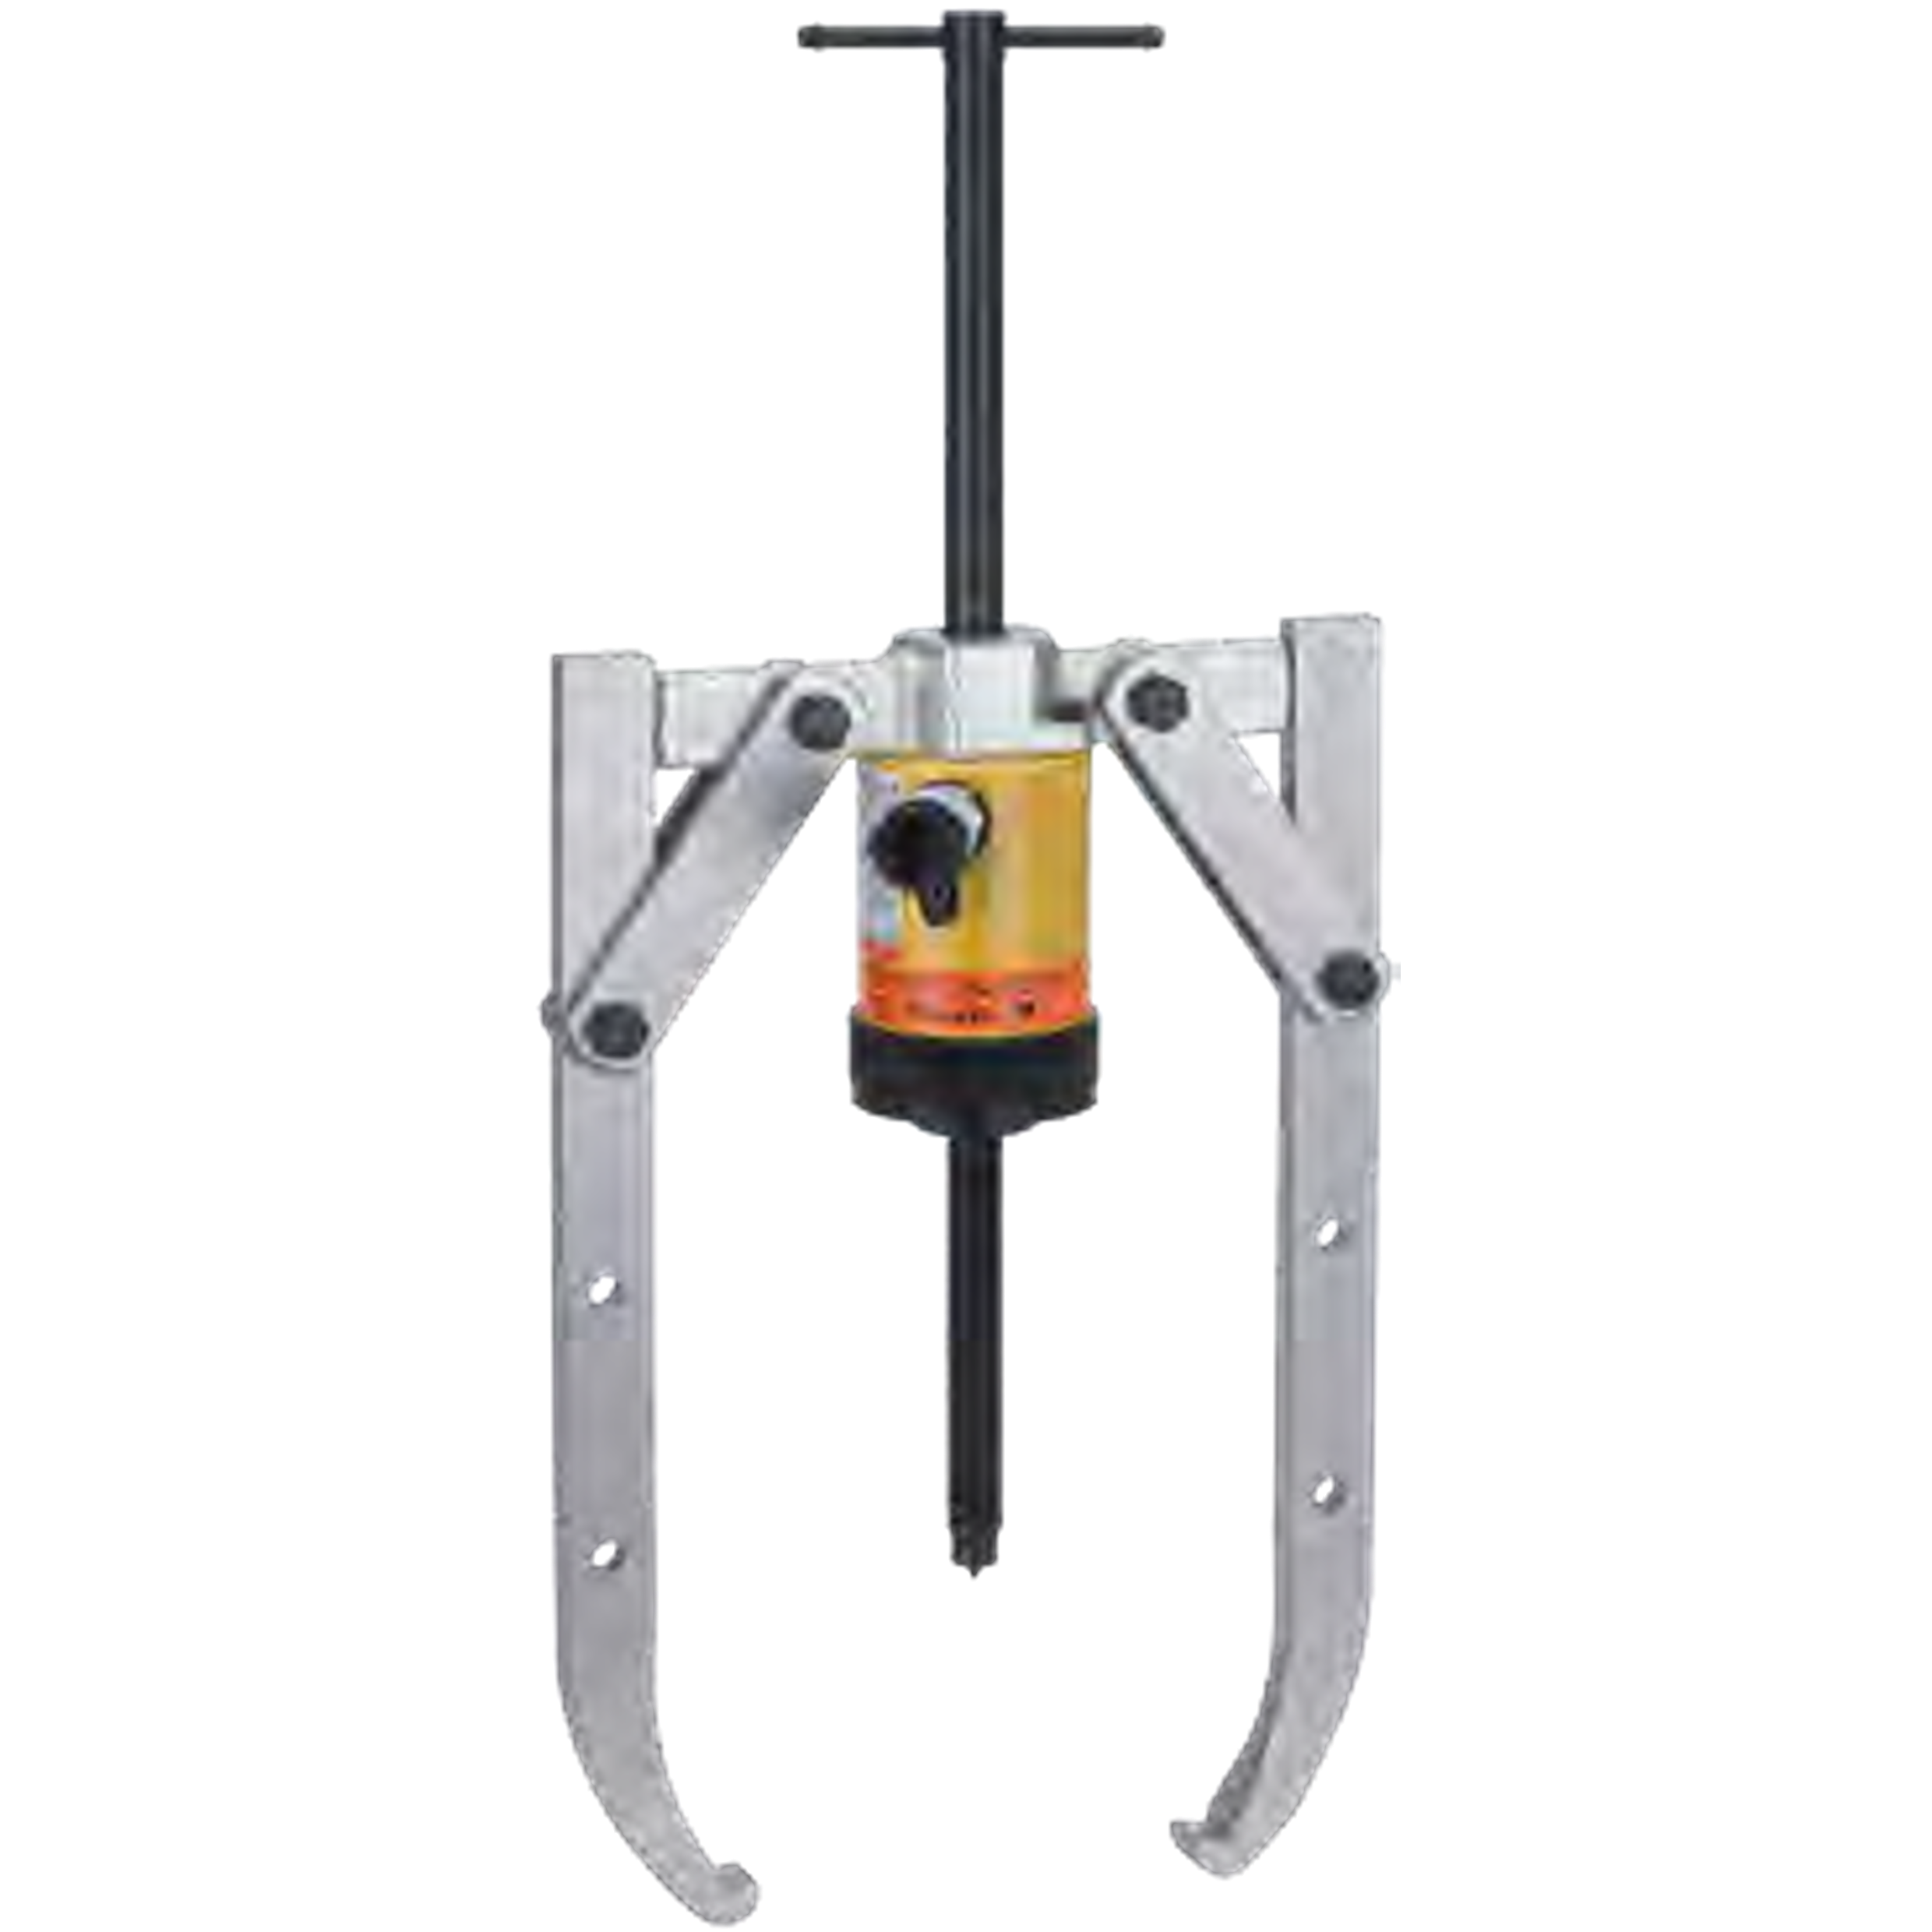 NEXUS HY135 2-Arm Hydraulic Puller Max. Pressure Of Up To 50 t - Premium 2-Arm Hydraulic Puller from NEXUS - Shop now at Yew Aik.